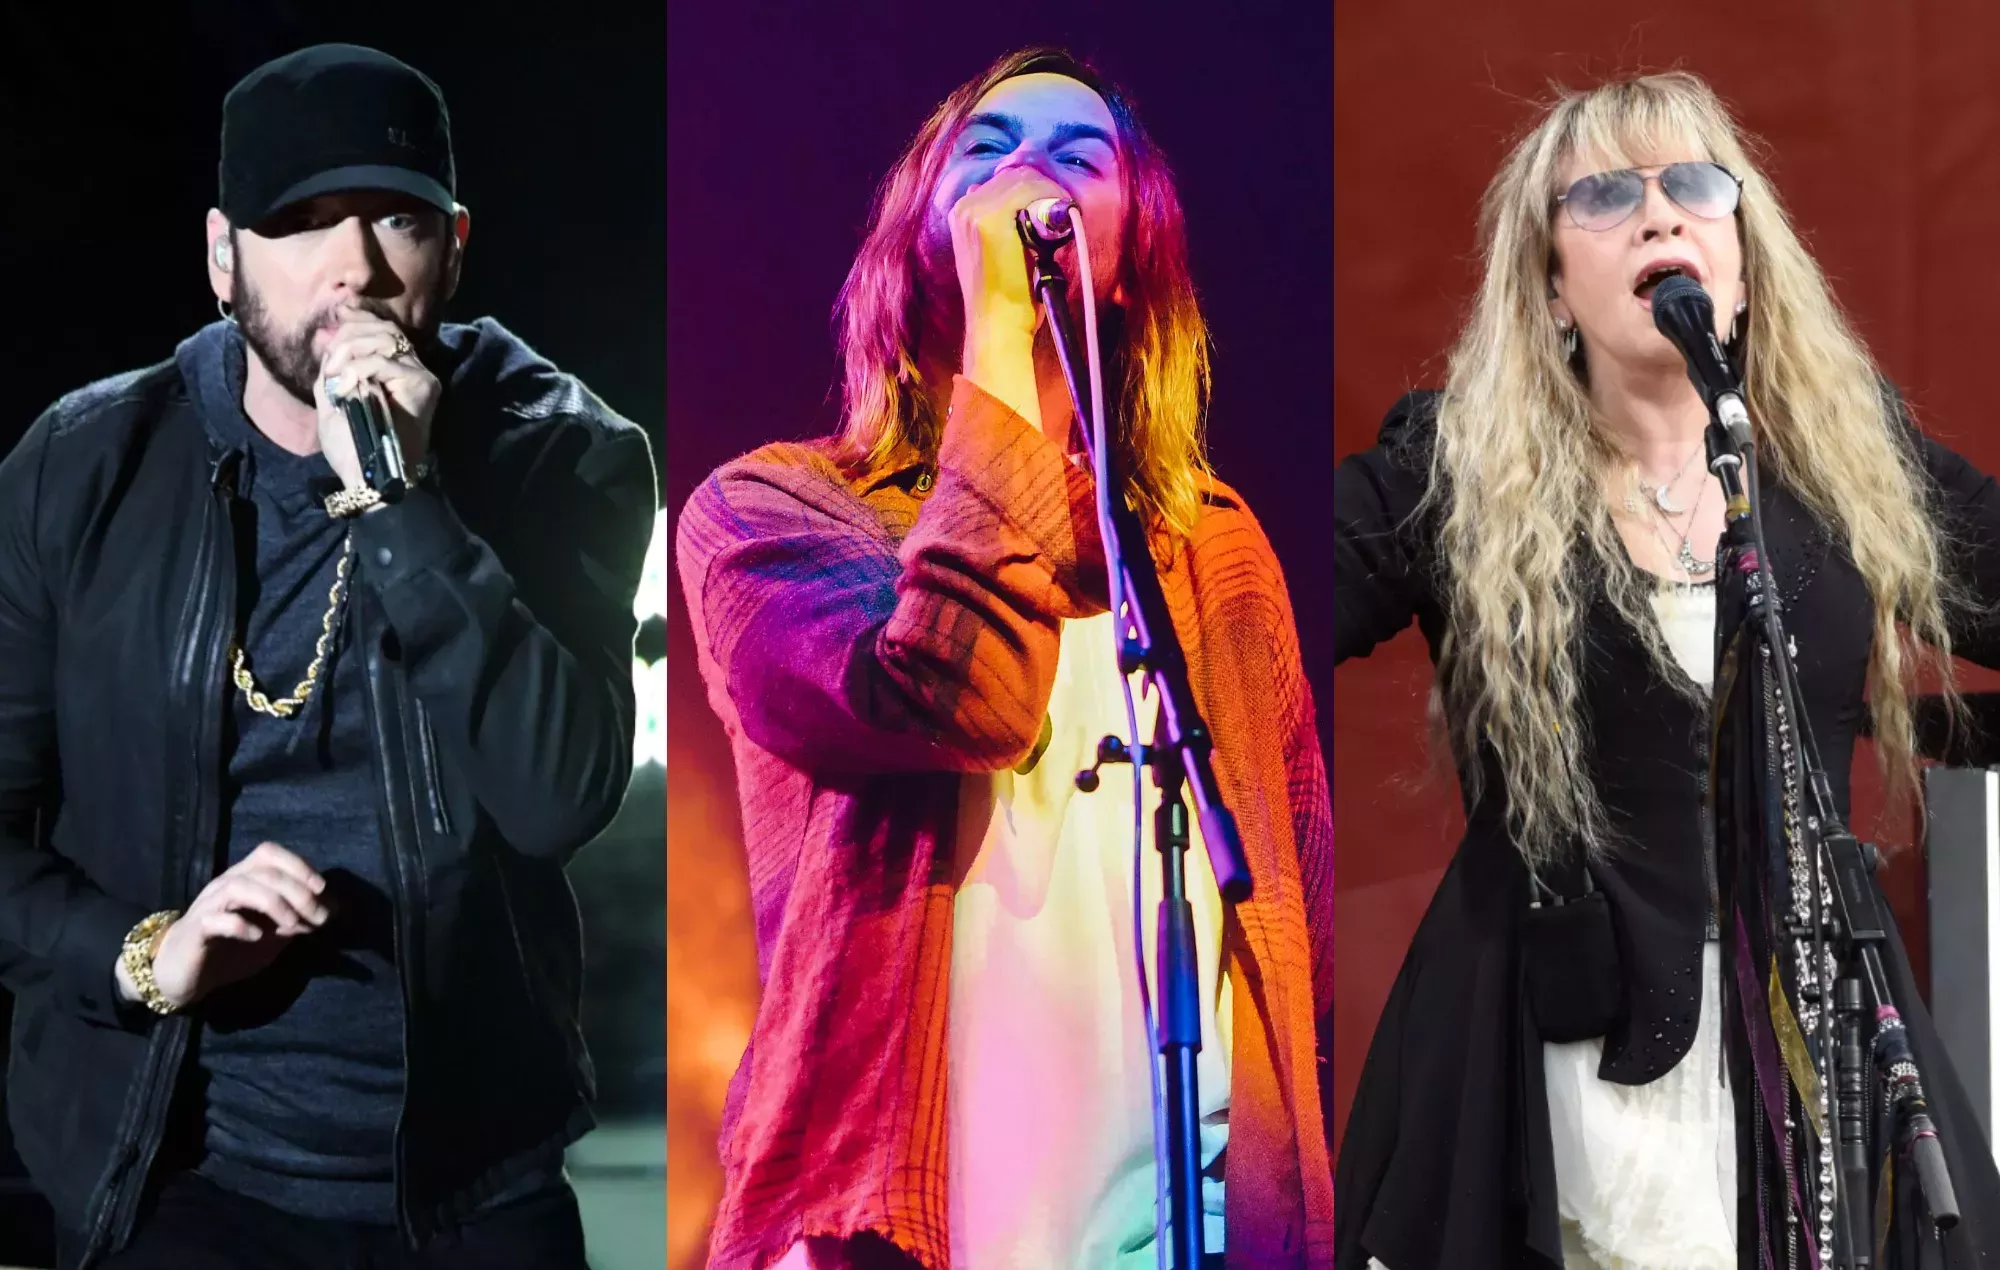 Eminem, Tame Impala, Stevie Nicks and others will participate in the soundtrack of the Elvis biopic